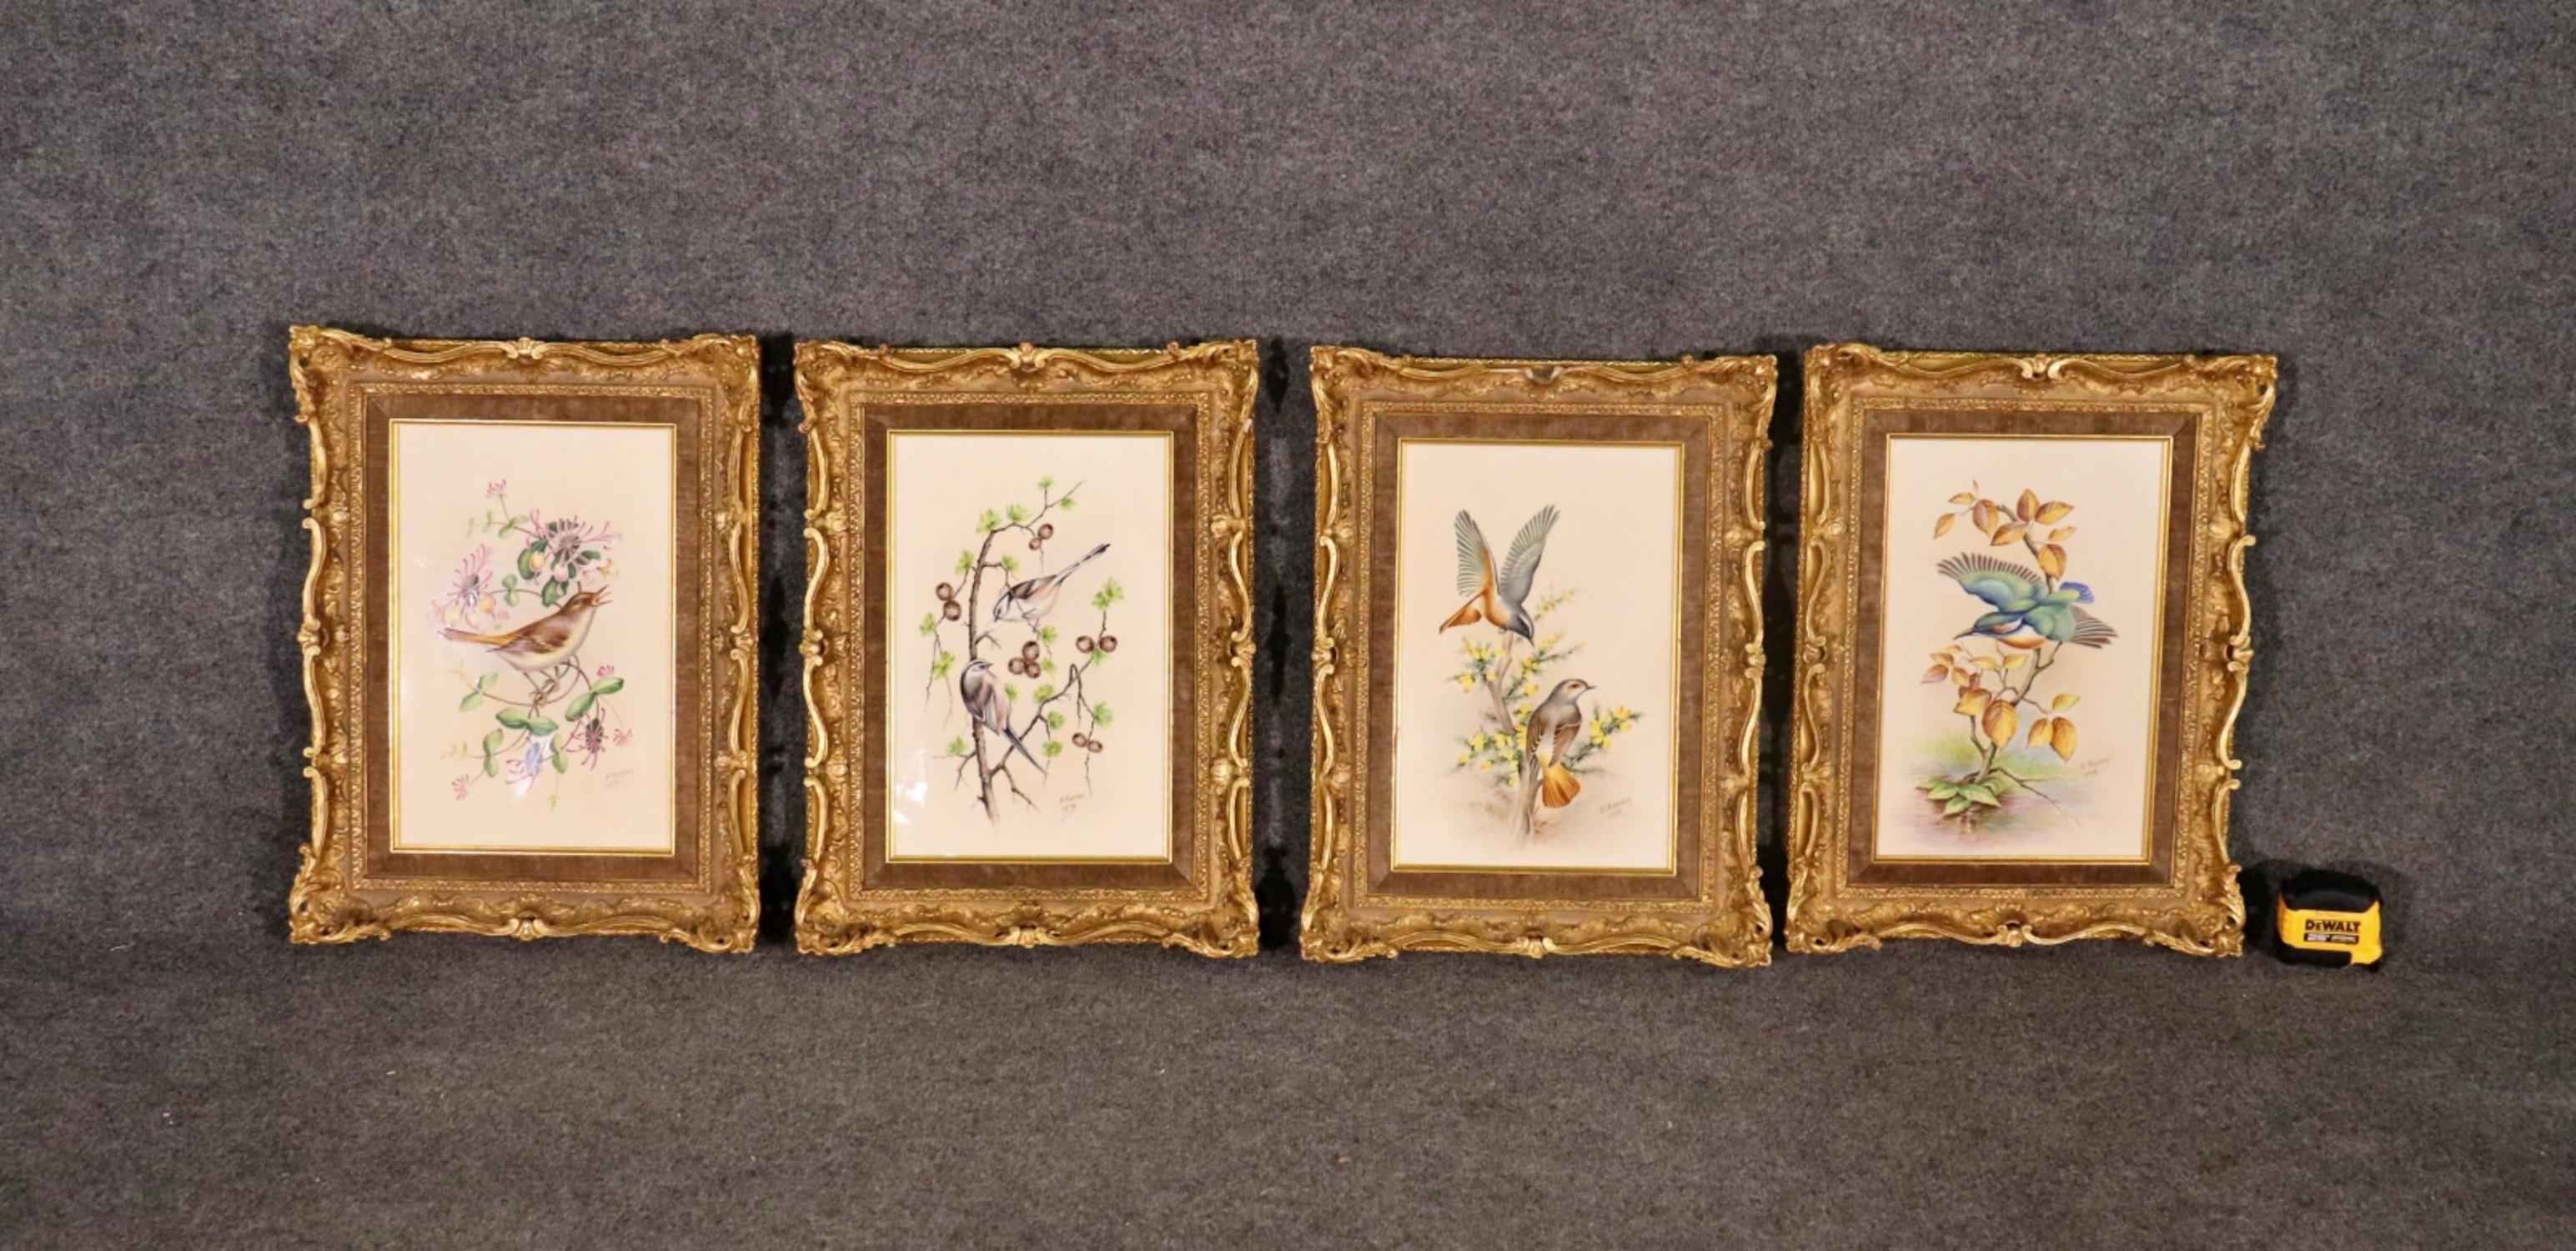 Signed E. Townsend and dated 1974. Number 10 (Nightingale), 11 (Long-Tailed Tits), 12 (Redstarts) and 13 (Kingfisher) of 15. From a limited edition of 25 sets. British bird subjects by the Worcester Royal Porcelain Co. LTD. Hand carved frame